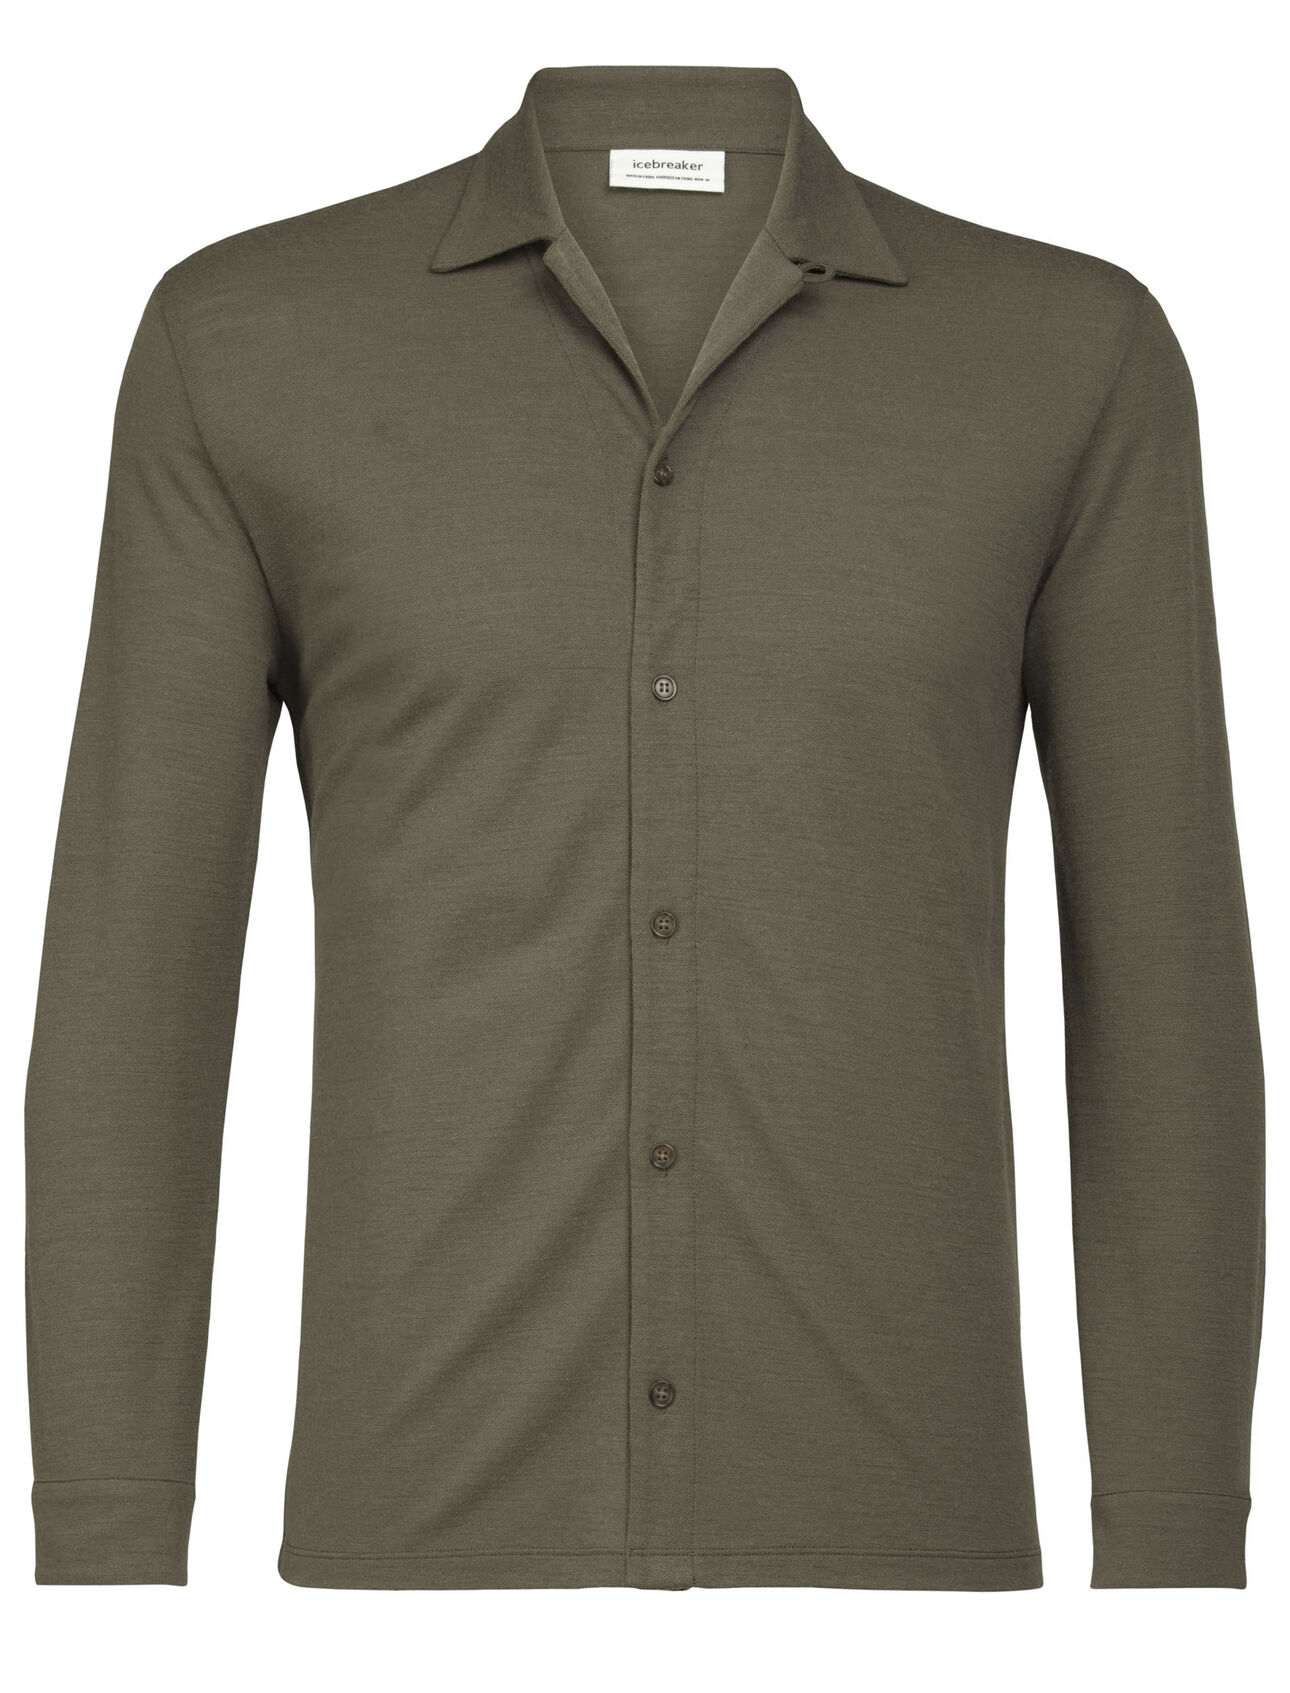 para hombre Merino Pique Long Sleeve Shirt A lightweight, 100% merino top with a classic button-front silhouette, the Merino Pique Long Sleeve Shirt is reliable, stylish and full of everyday comfort.